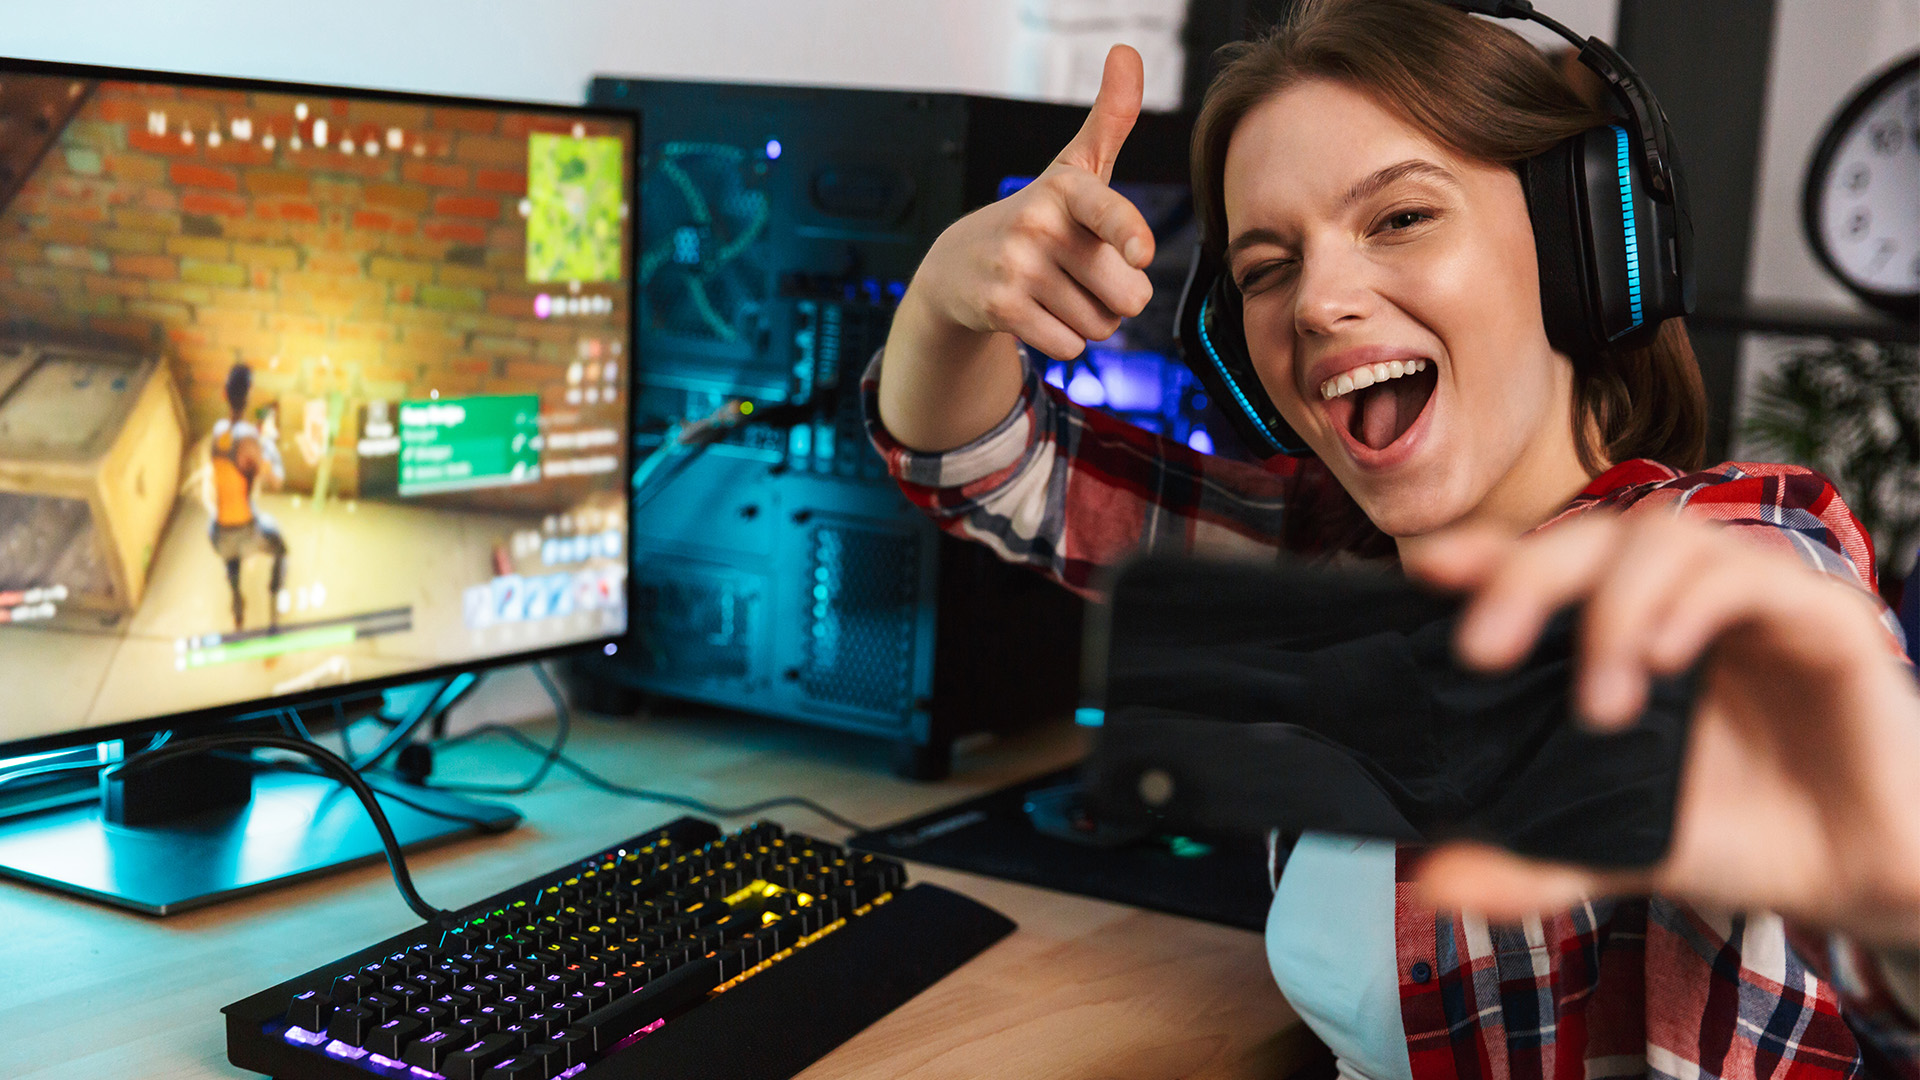 A woman takes a selfie in front of a gaming computer running Fortnite. 